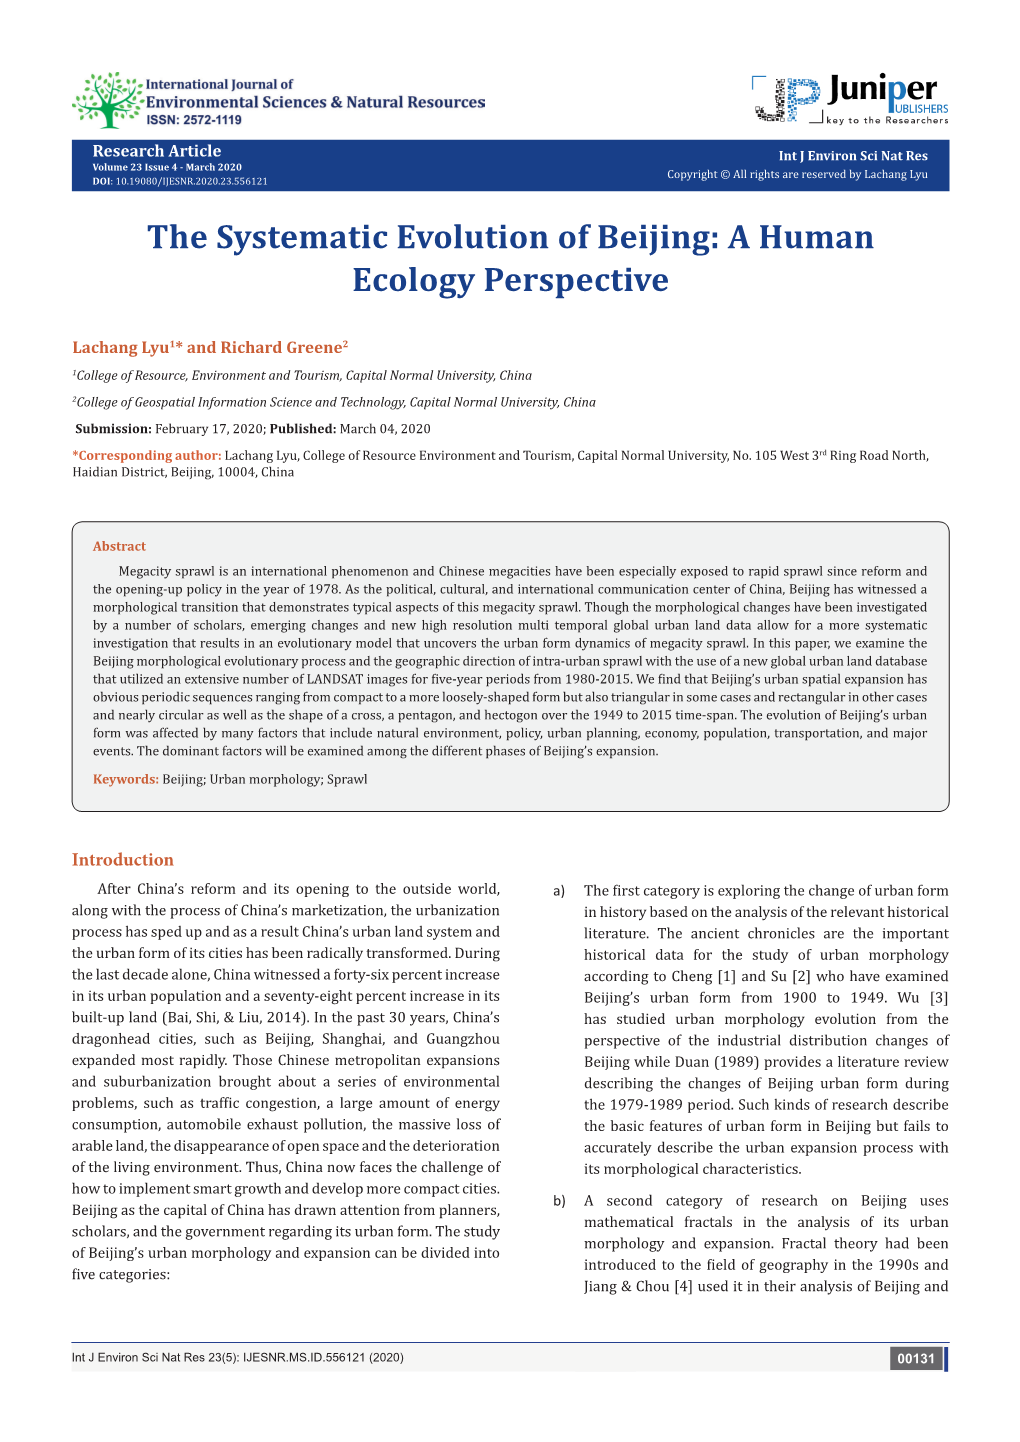 The Systematic Evolution of Beijing: a Human Ecology Perspective